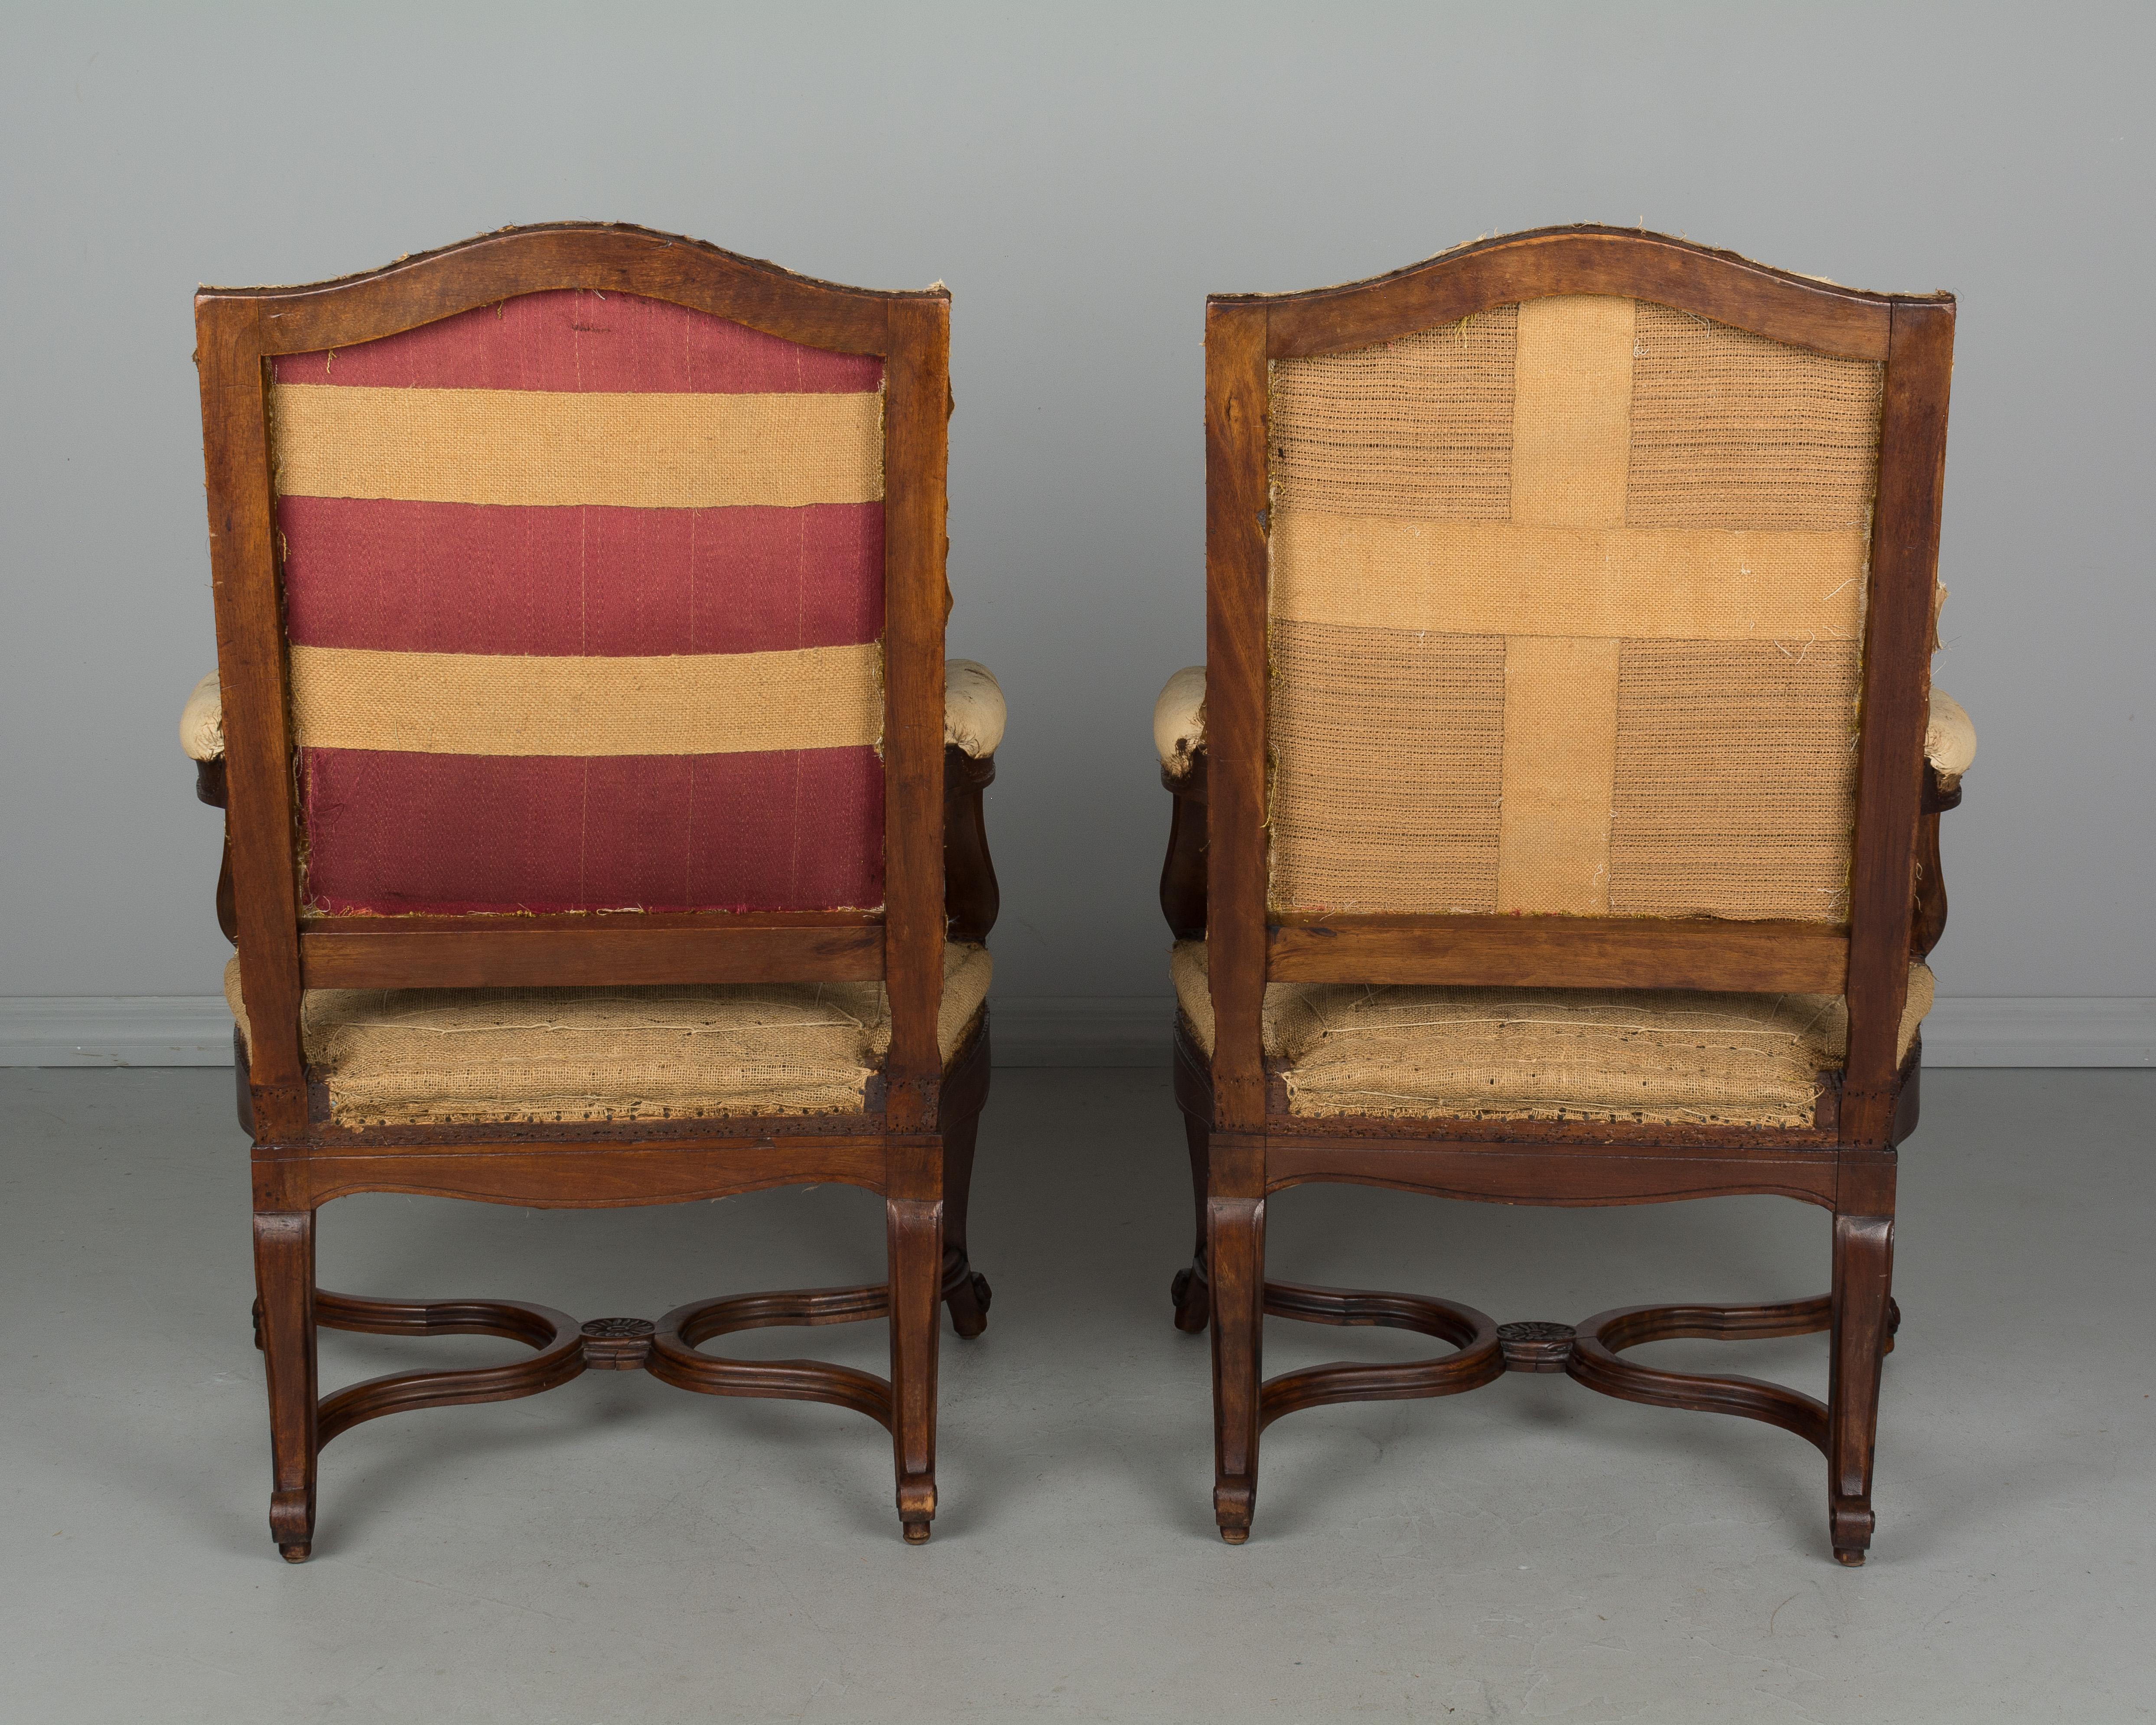 Hand-Carved Pair of French Regency Style Fauteuils